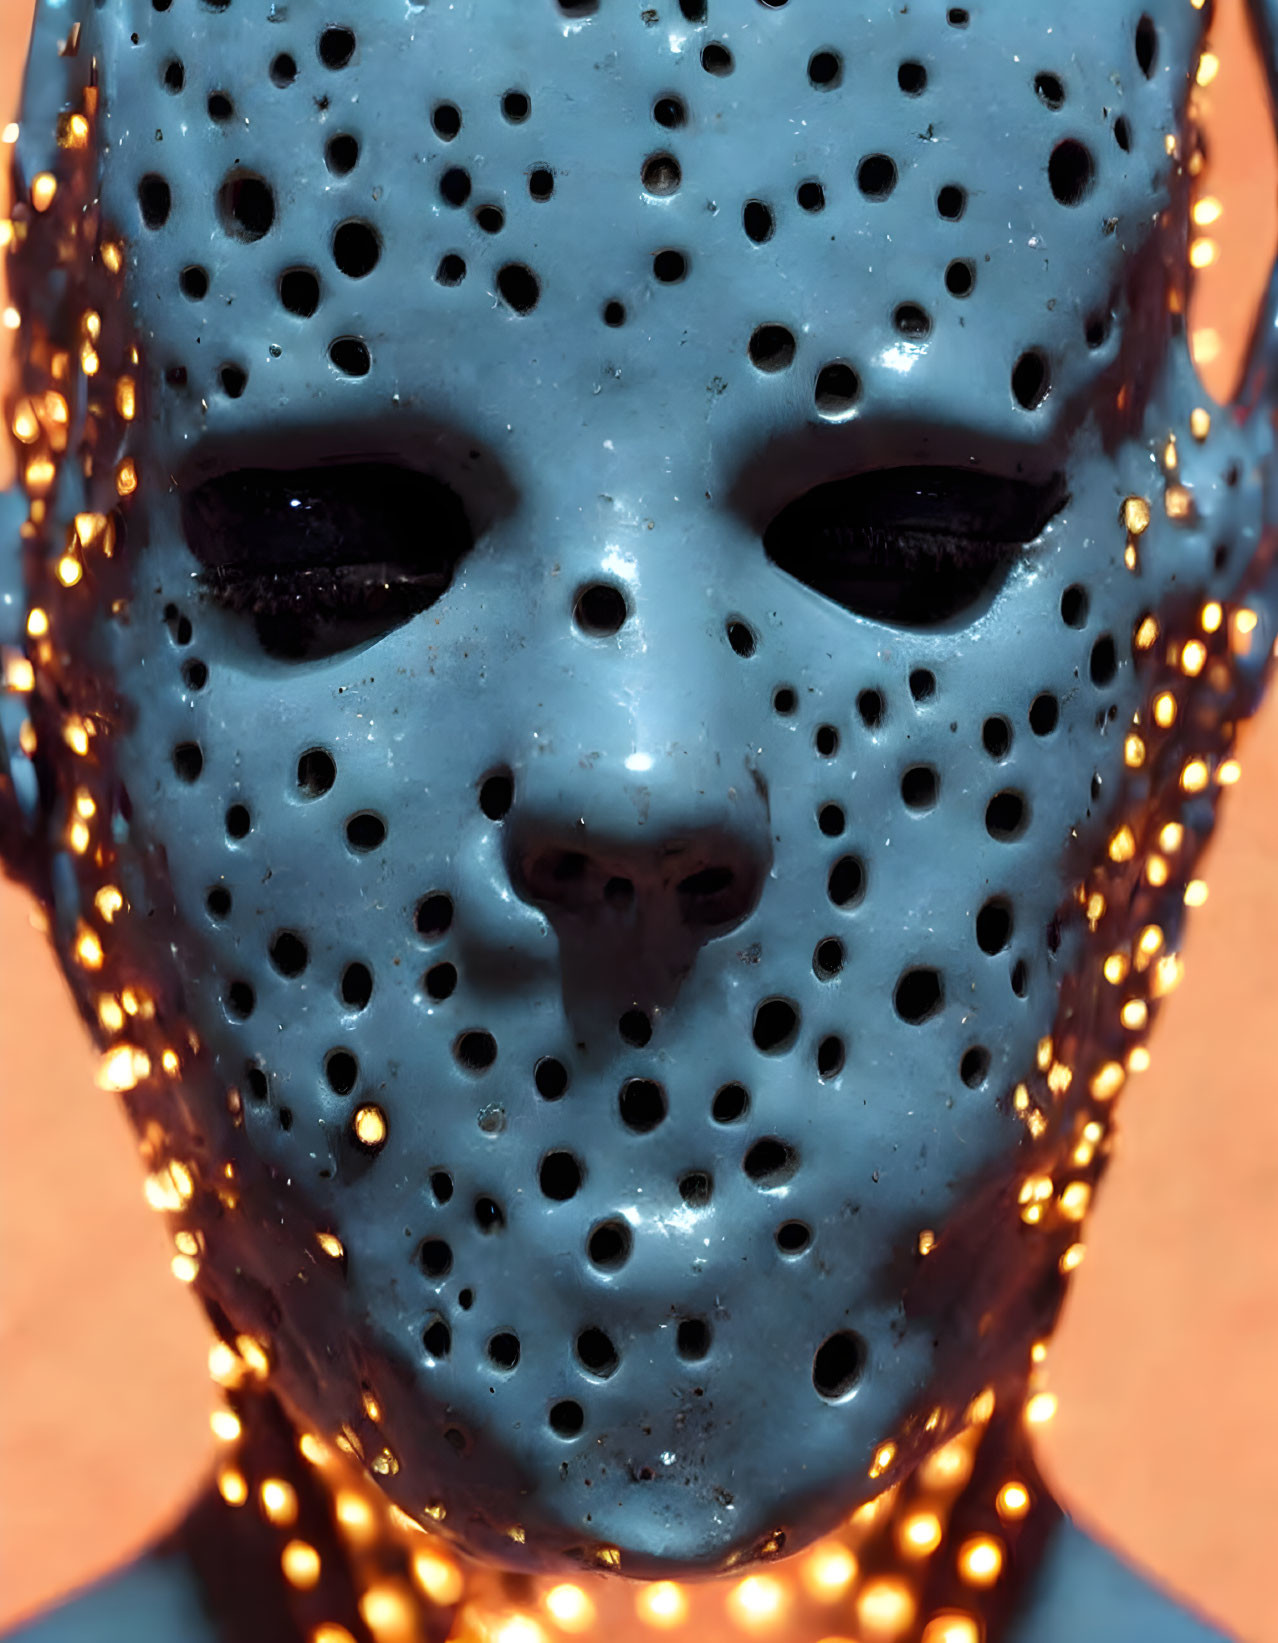 Mask with Small Holes Casting Shadows on Neck